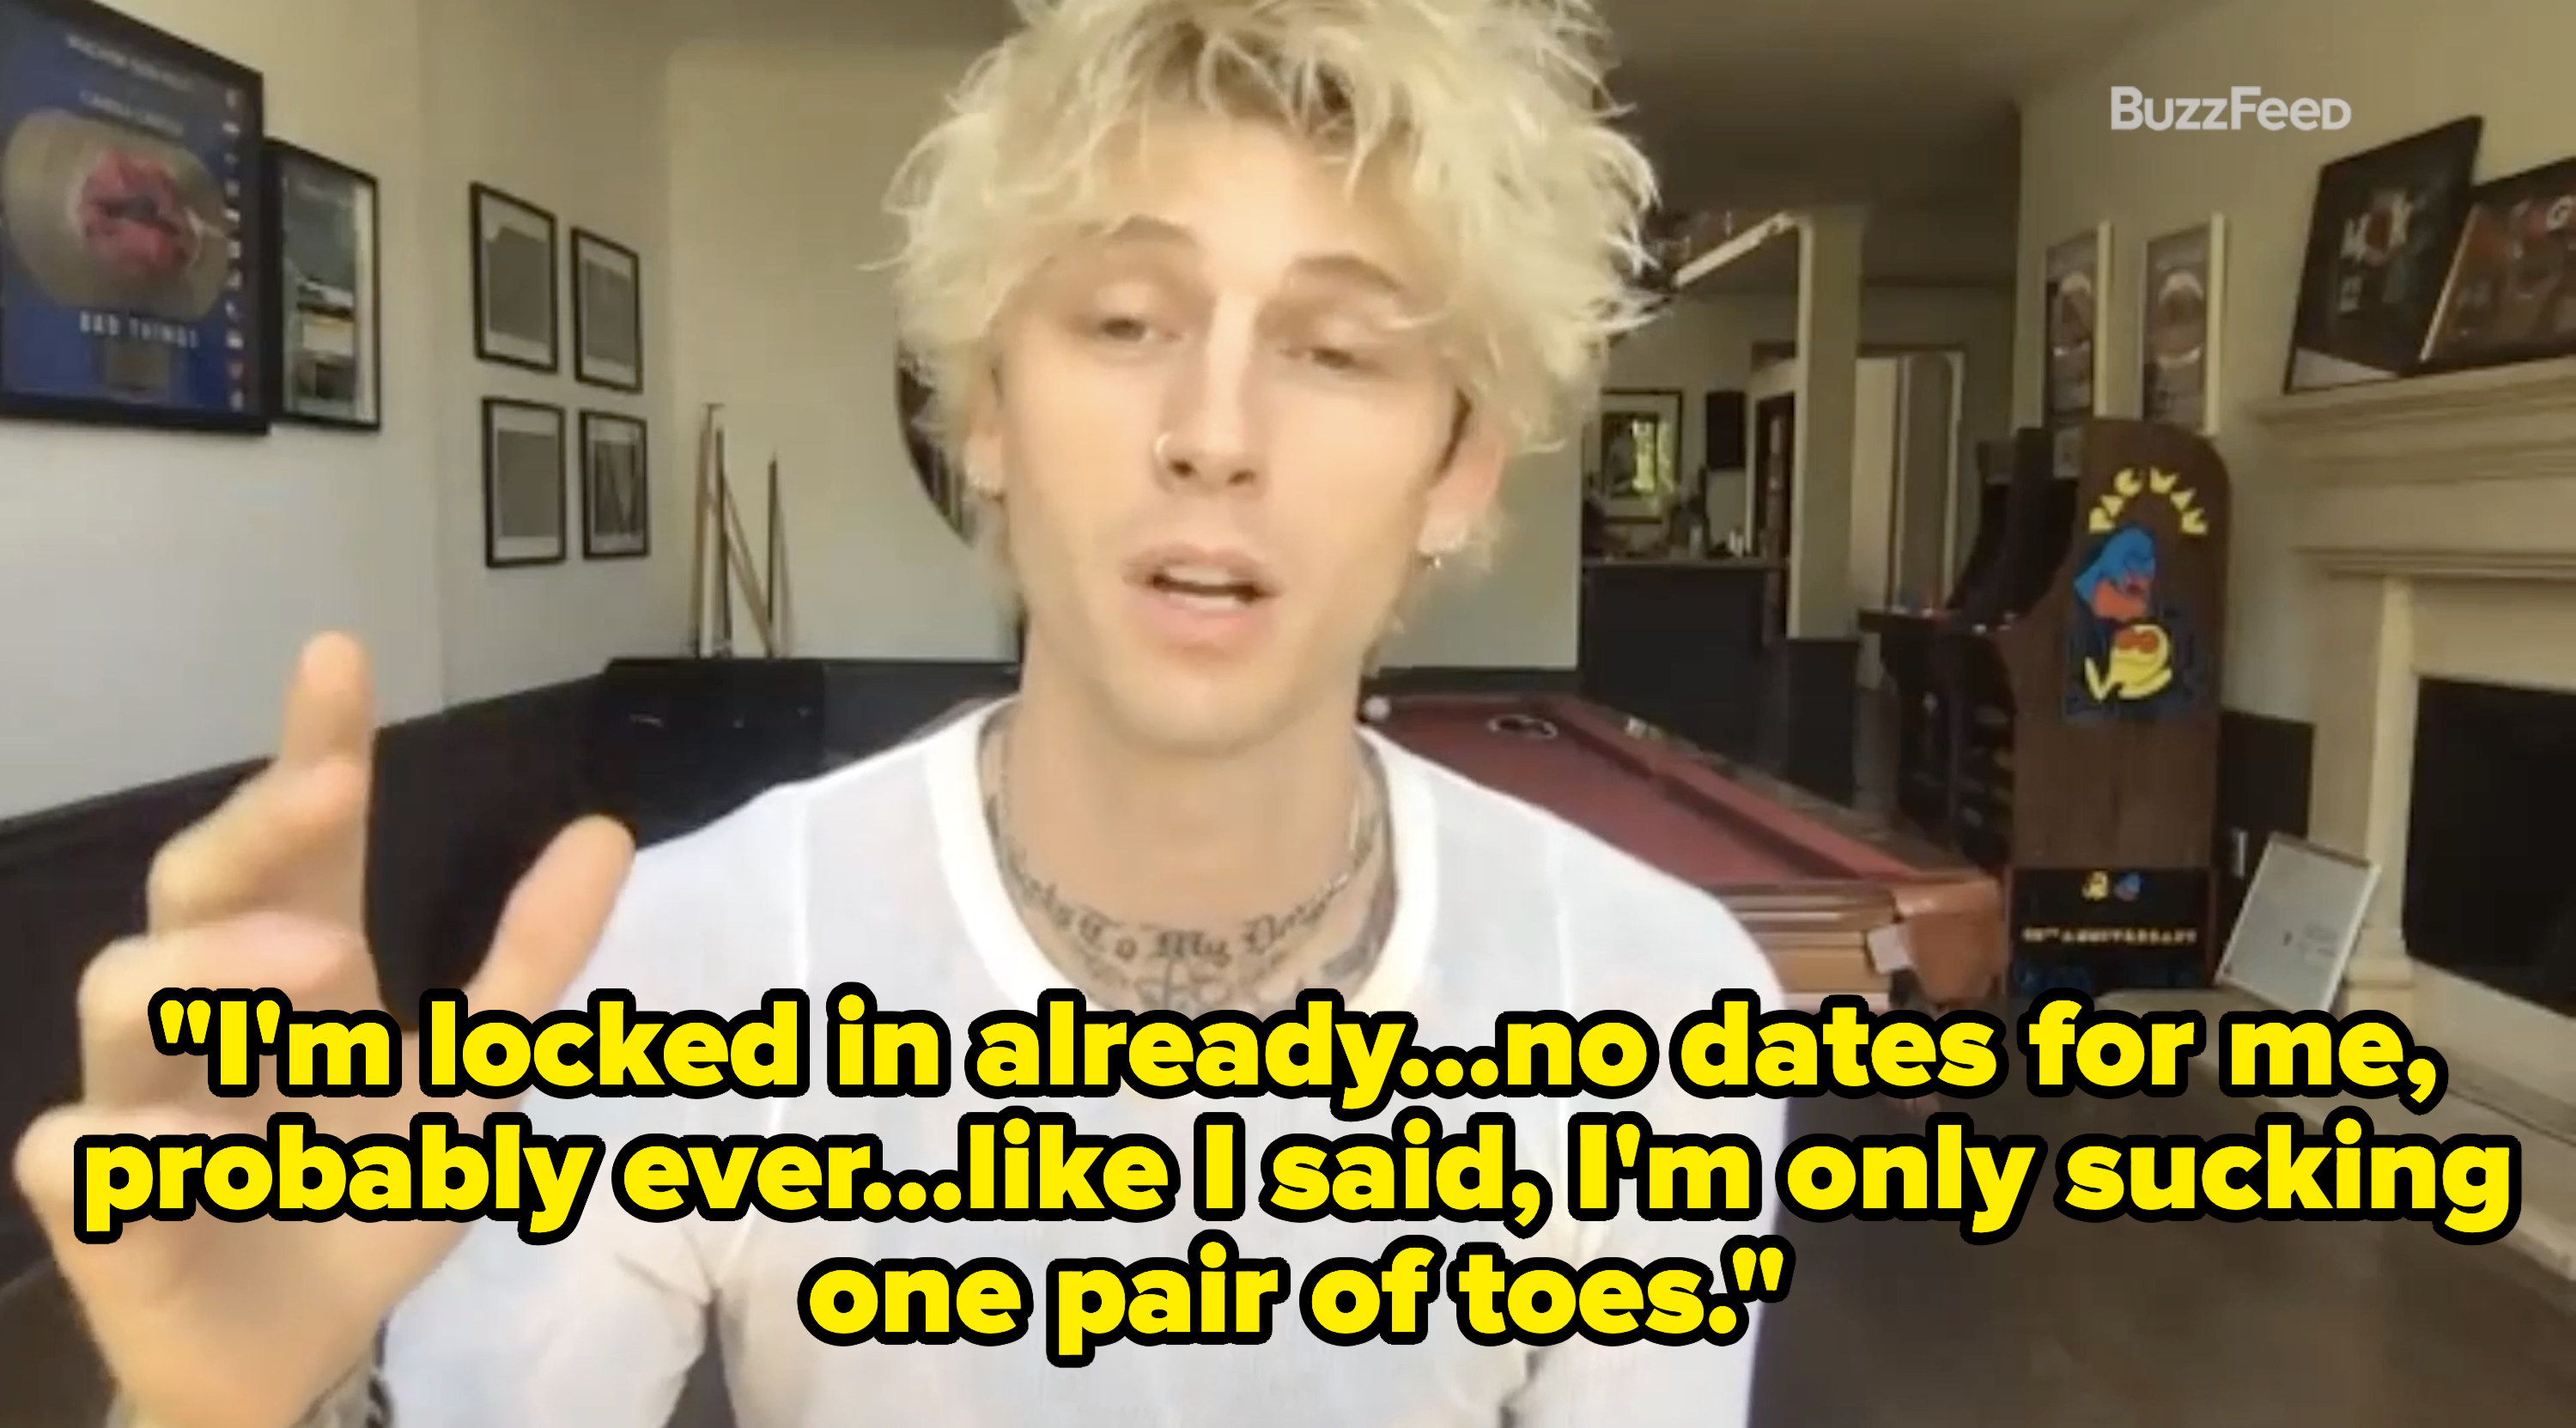 Machine Gun Kelly talking about not sucking a fan&#x27;s toes in a BuzzFeed interview. 